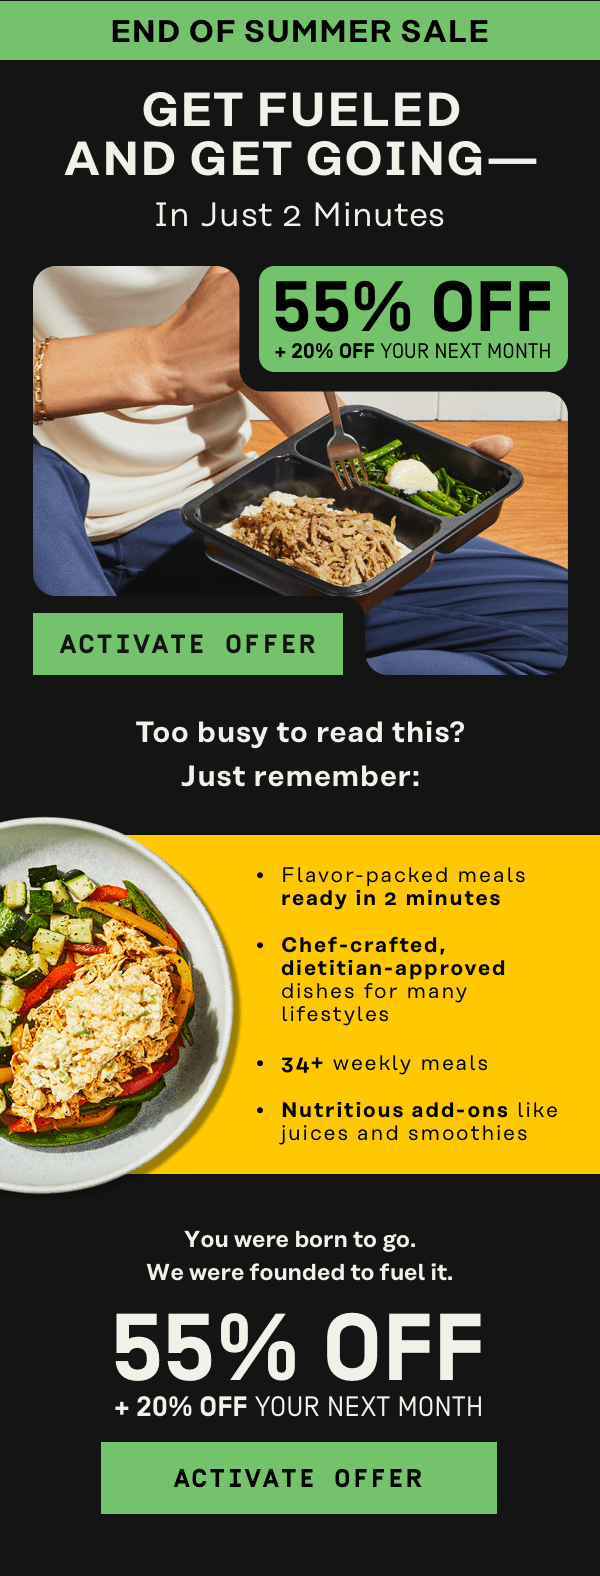 End of Summer Sale! 55% Off + 20% Off your next month | Activate Offer Too busy to read this? Just remember: flavor-packed meals ready in 2 minutes